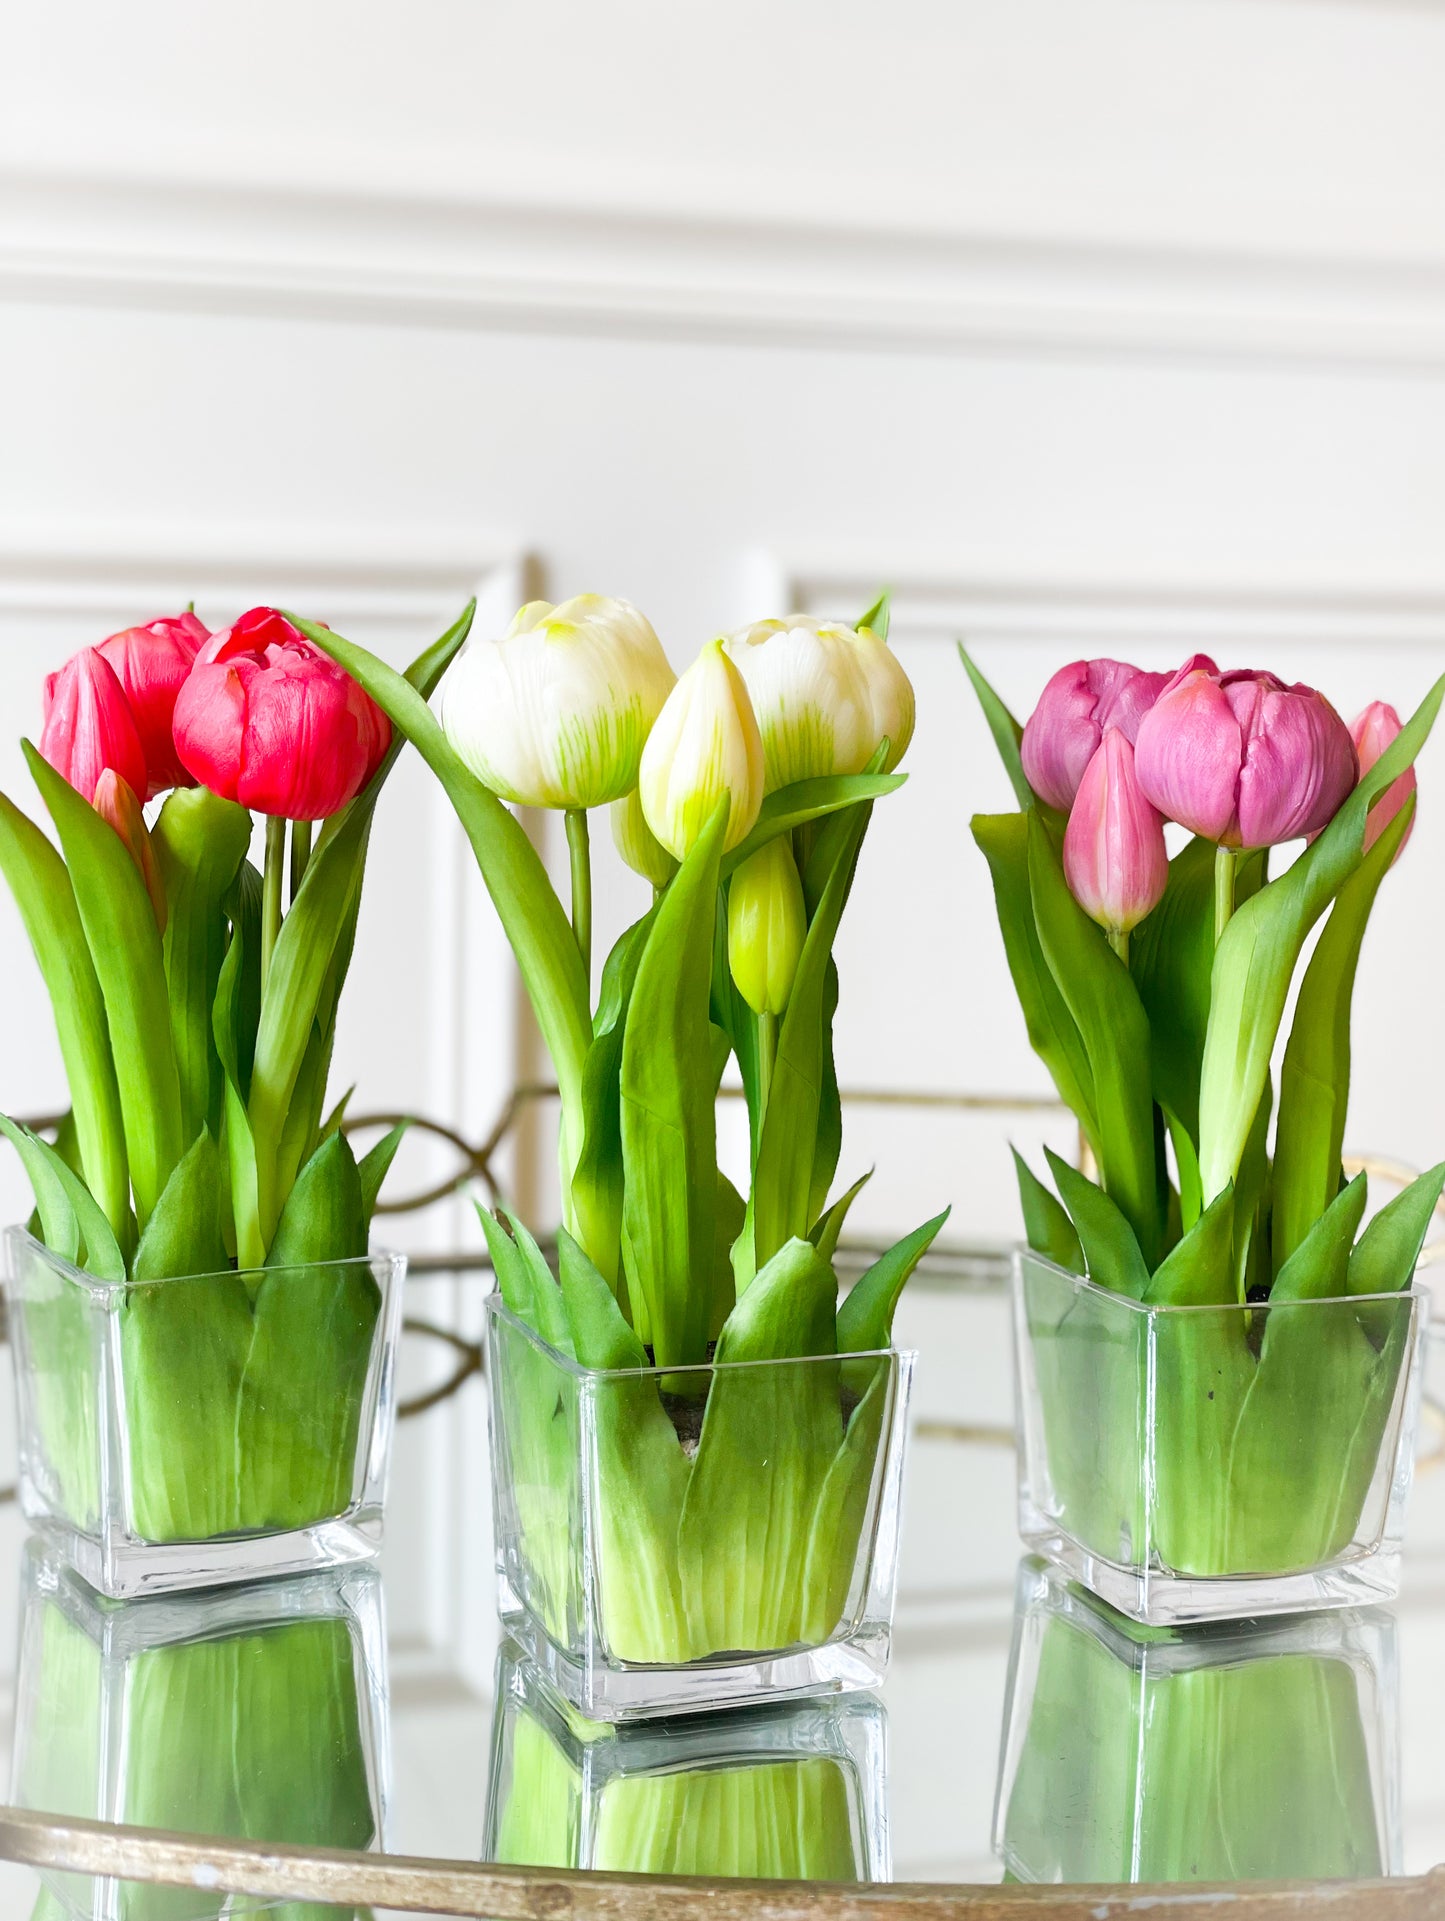 Pink Tulips In A Glass Vase